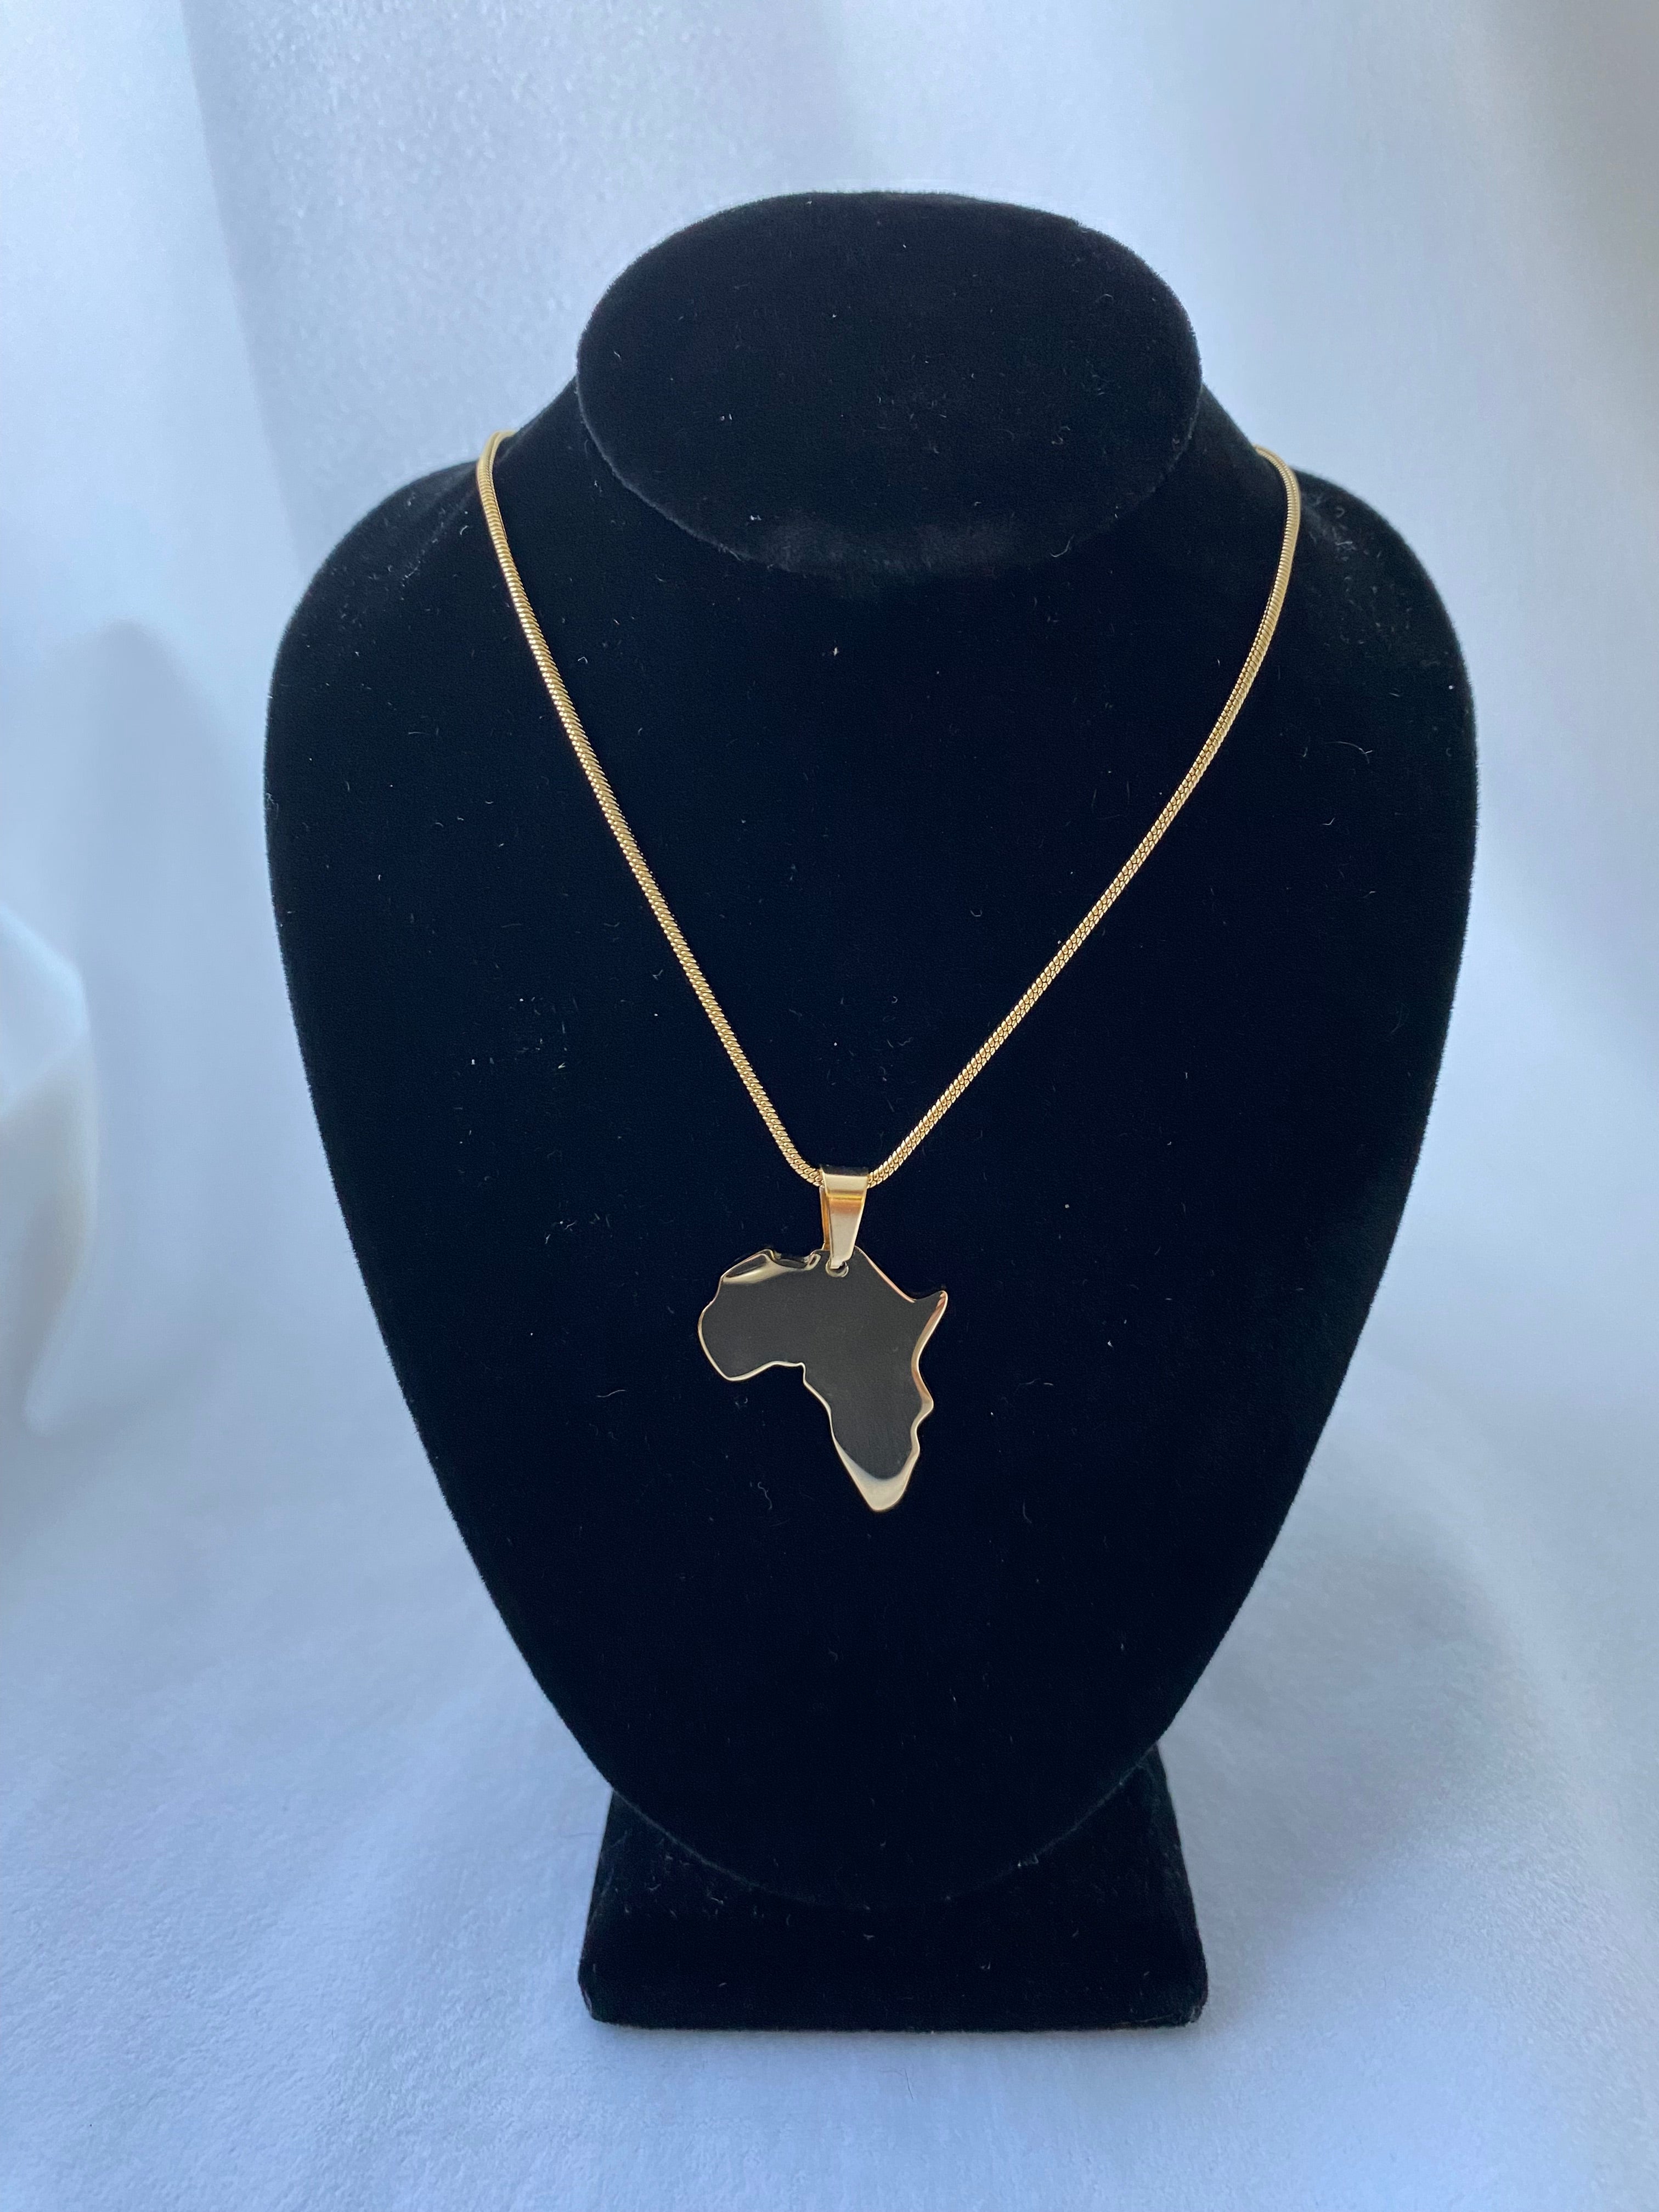 Country Map Necklaces - 18K Gold Plated